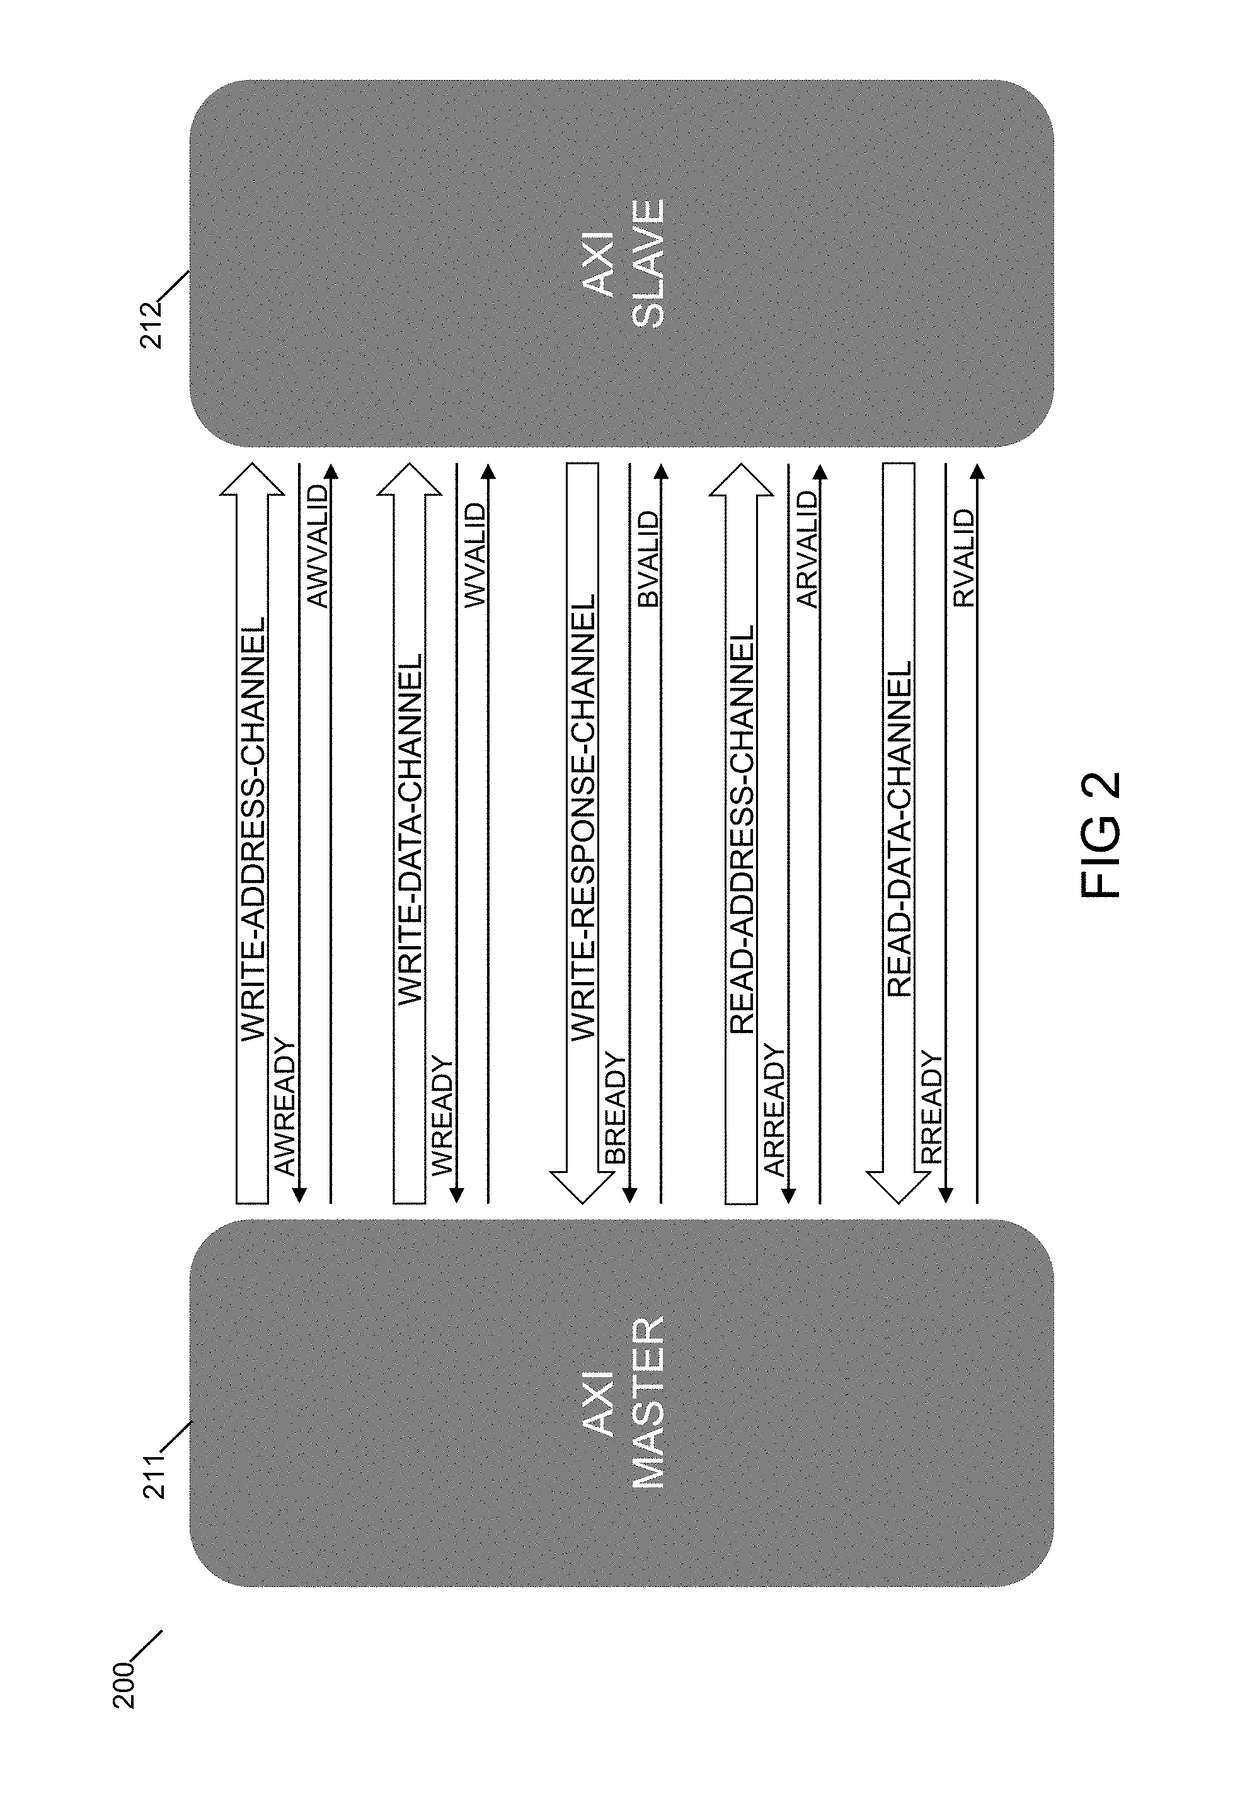 Application specific integrated circuit link